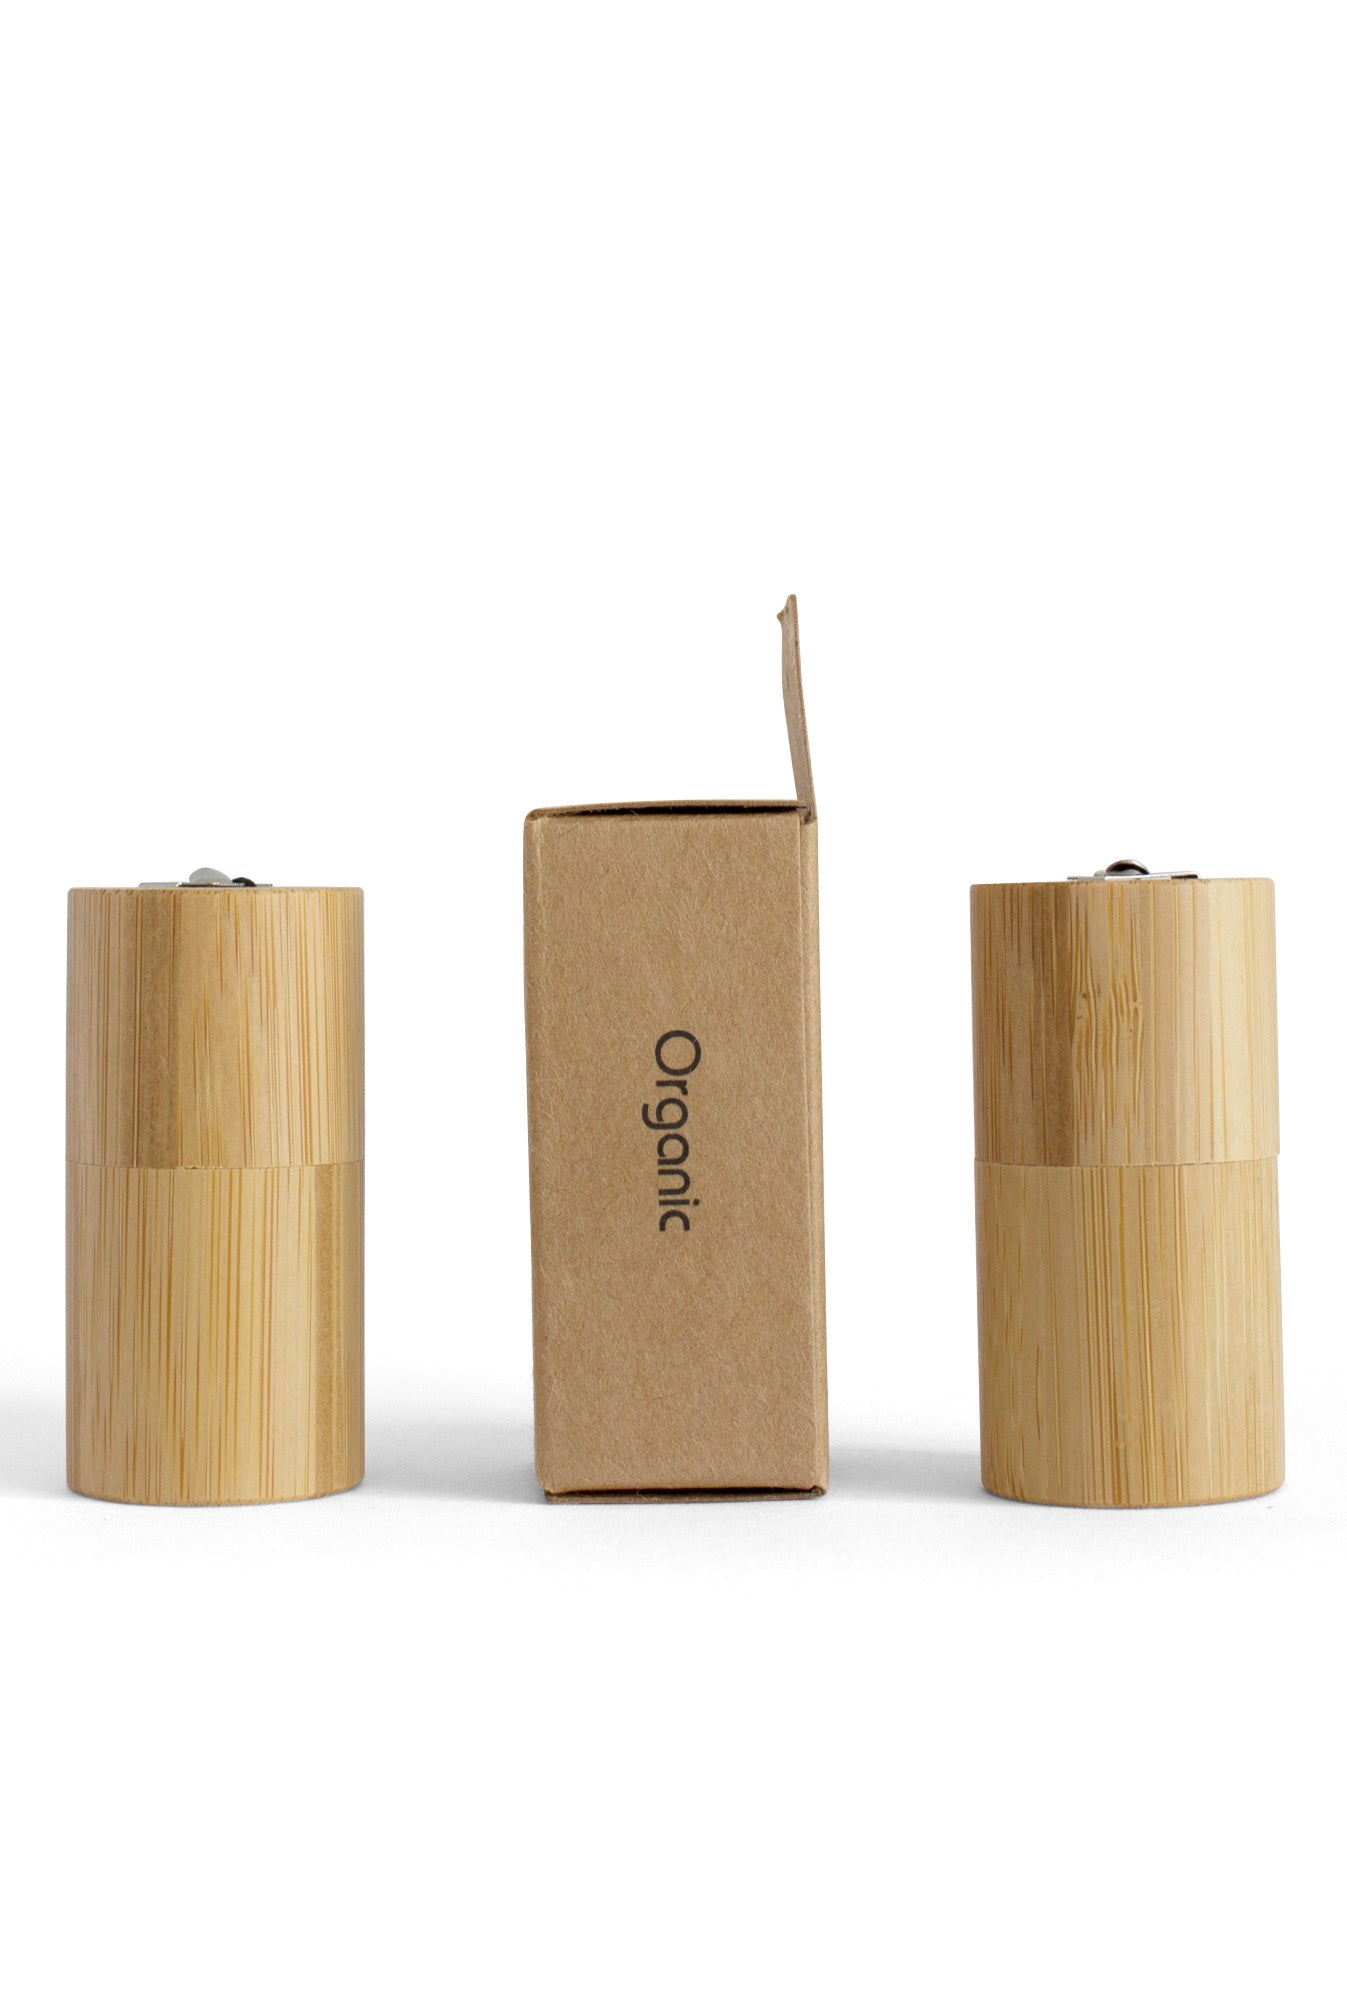 Biodegradable Dental Floss - Bamboo Container